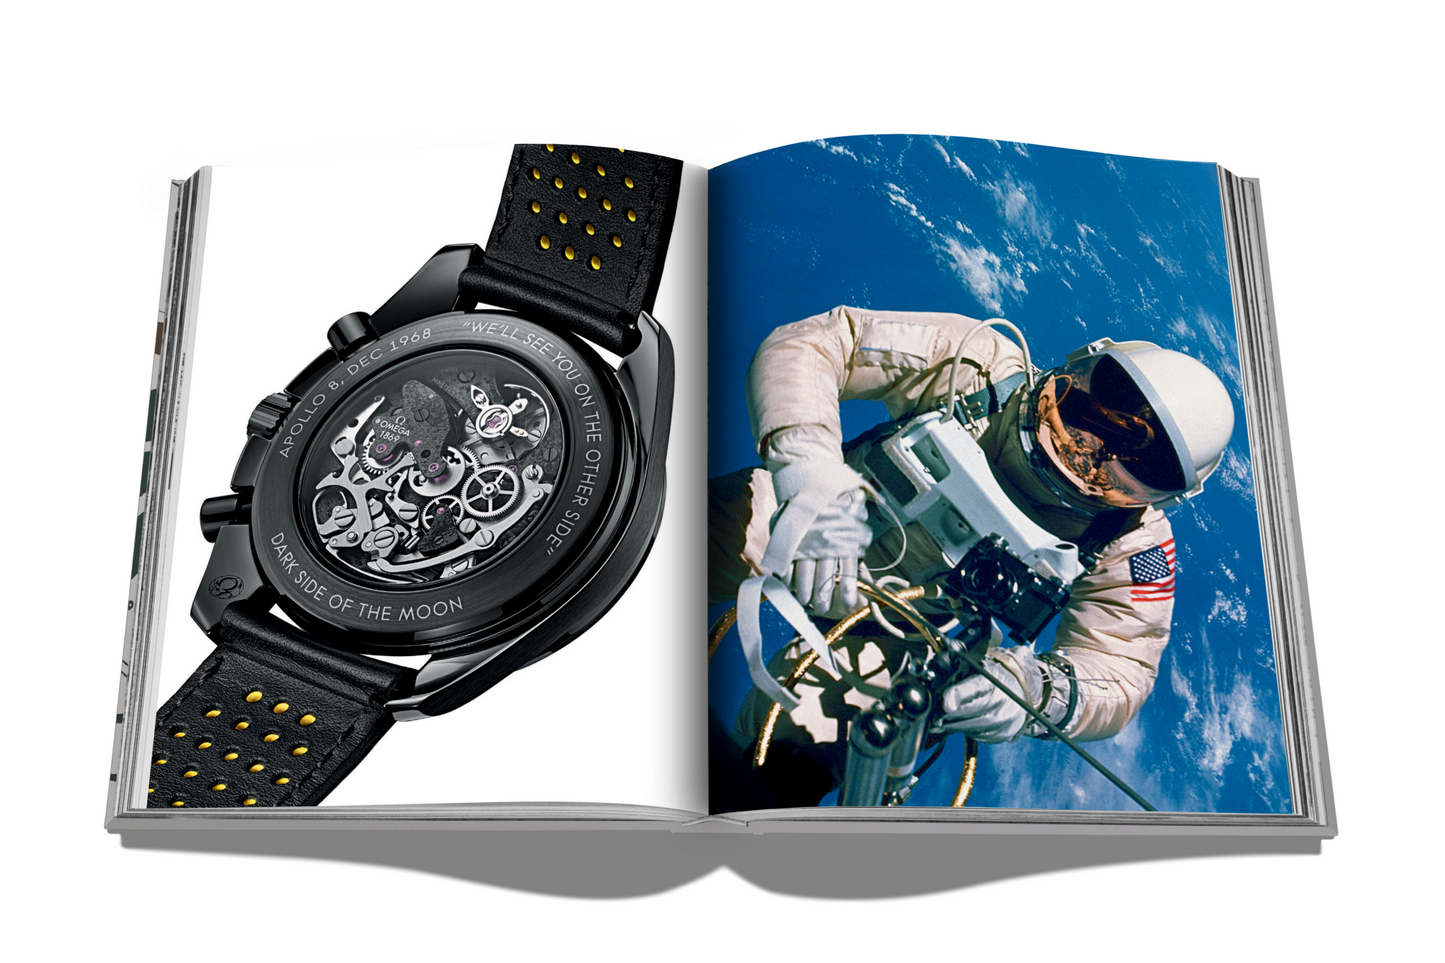 Book Watches: A Guide by Hodinkee - Assouline